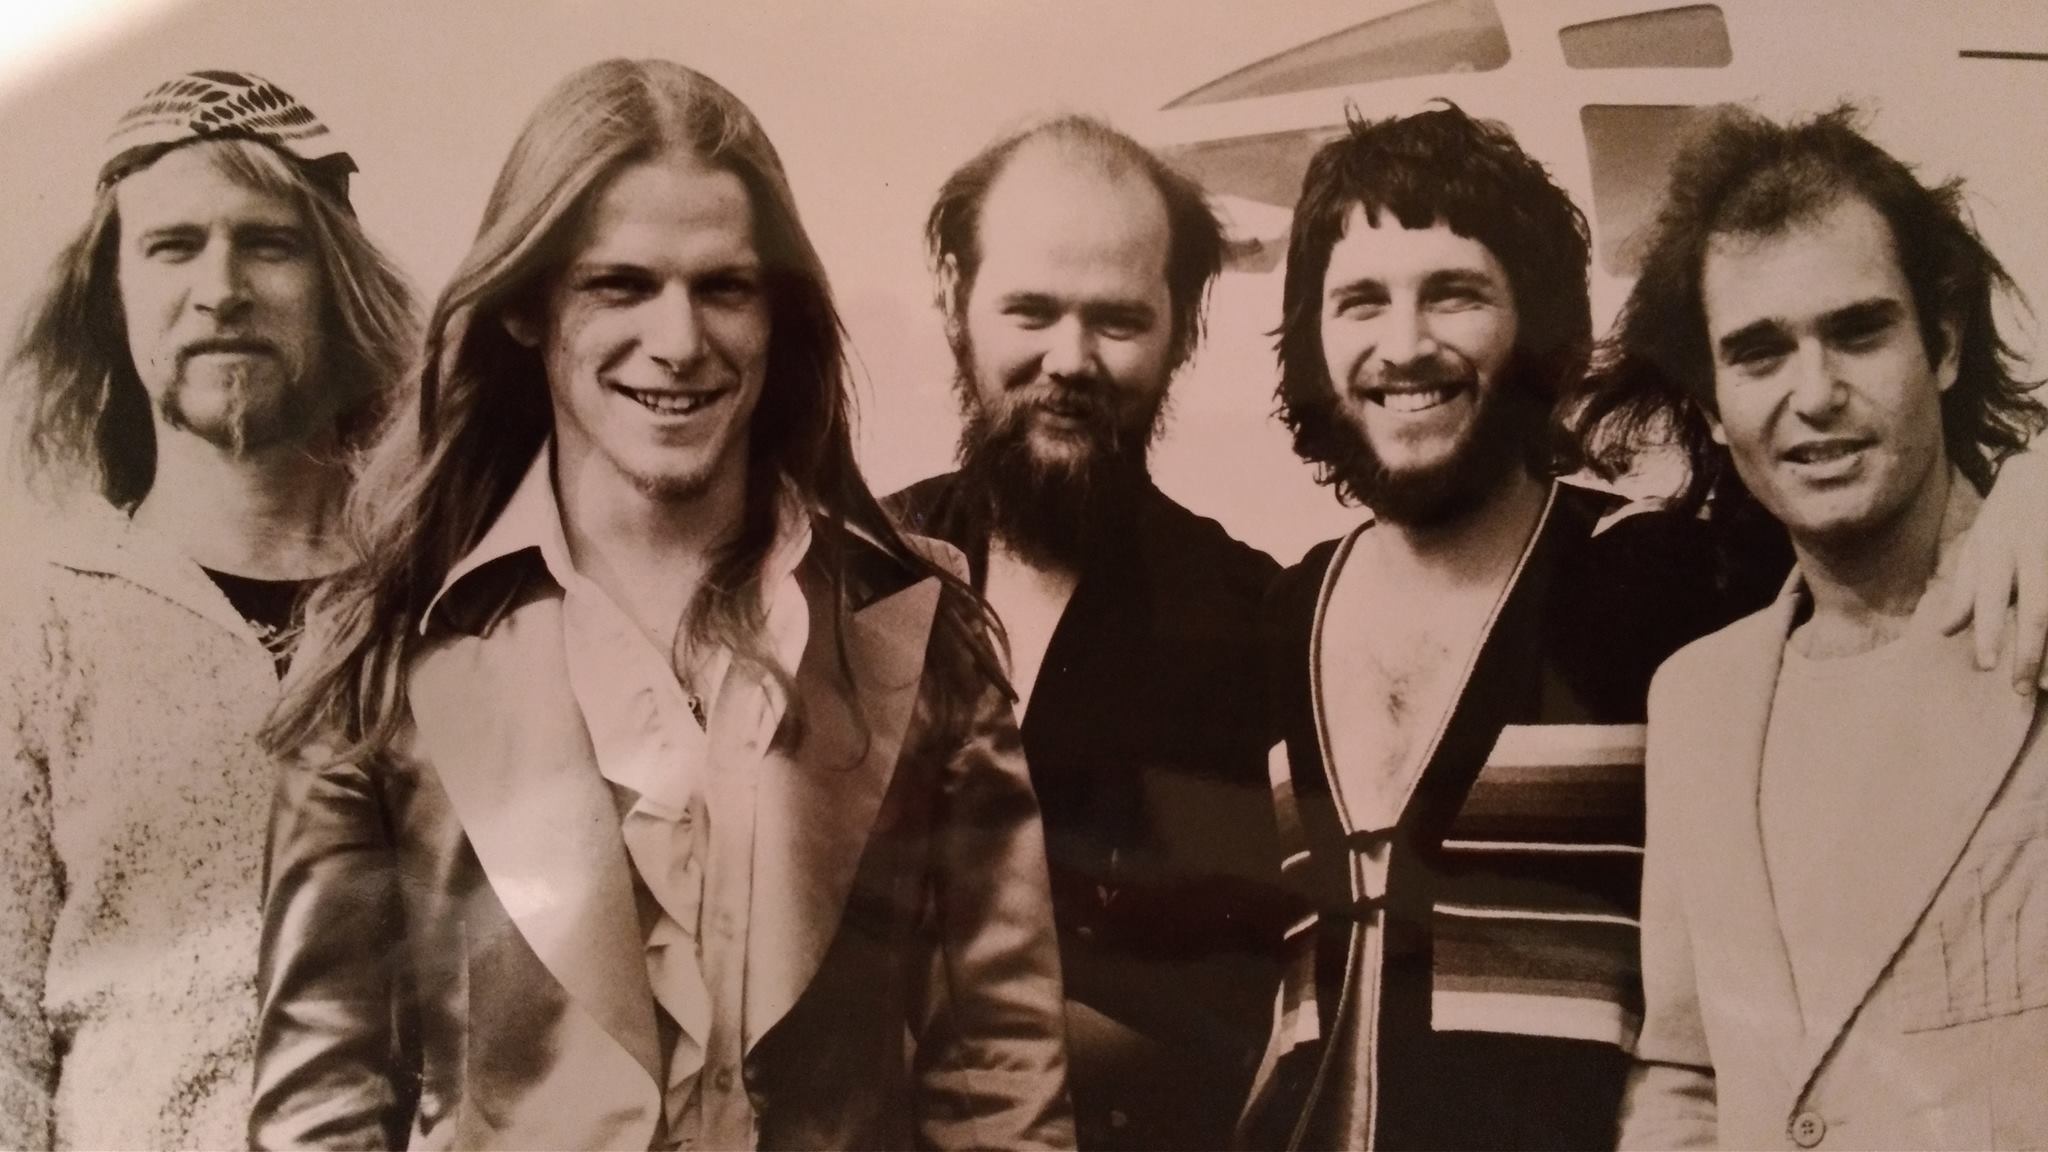 DIXIE DREGS CLASSIC LINEUP BACK TOGETHER FOR FIRST TIME IN 40 YEARS